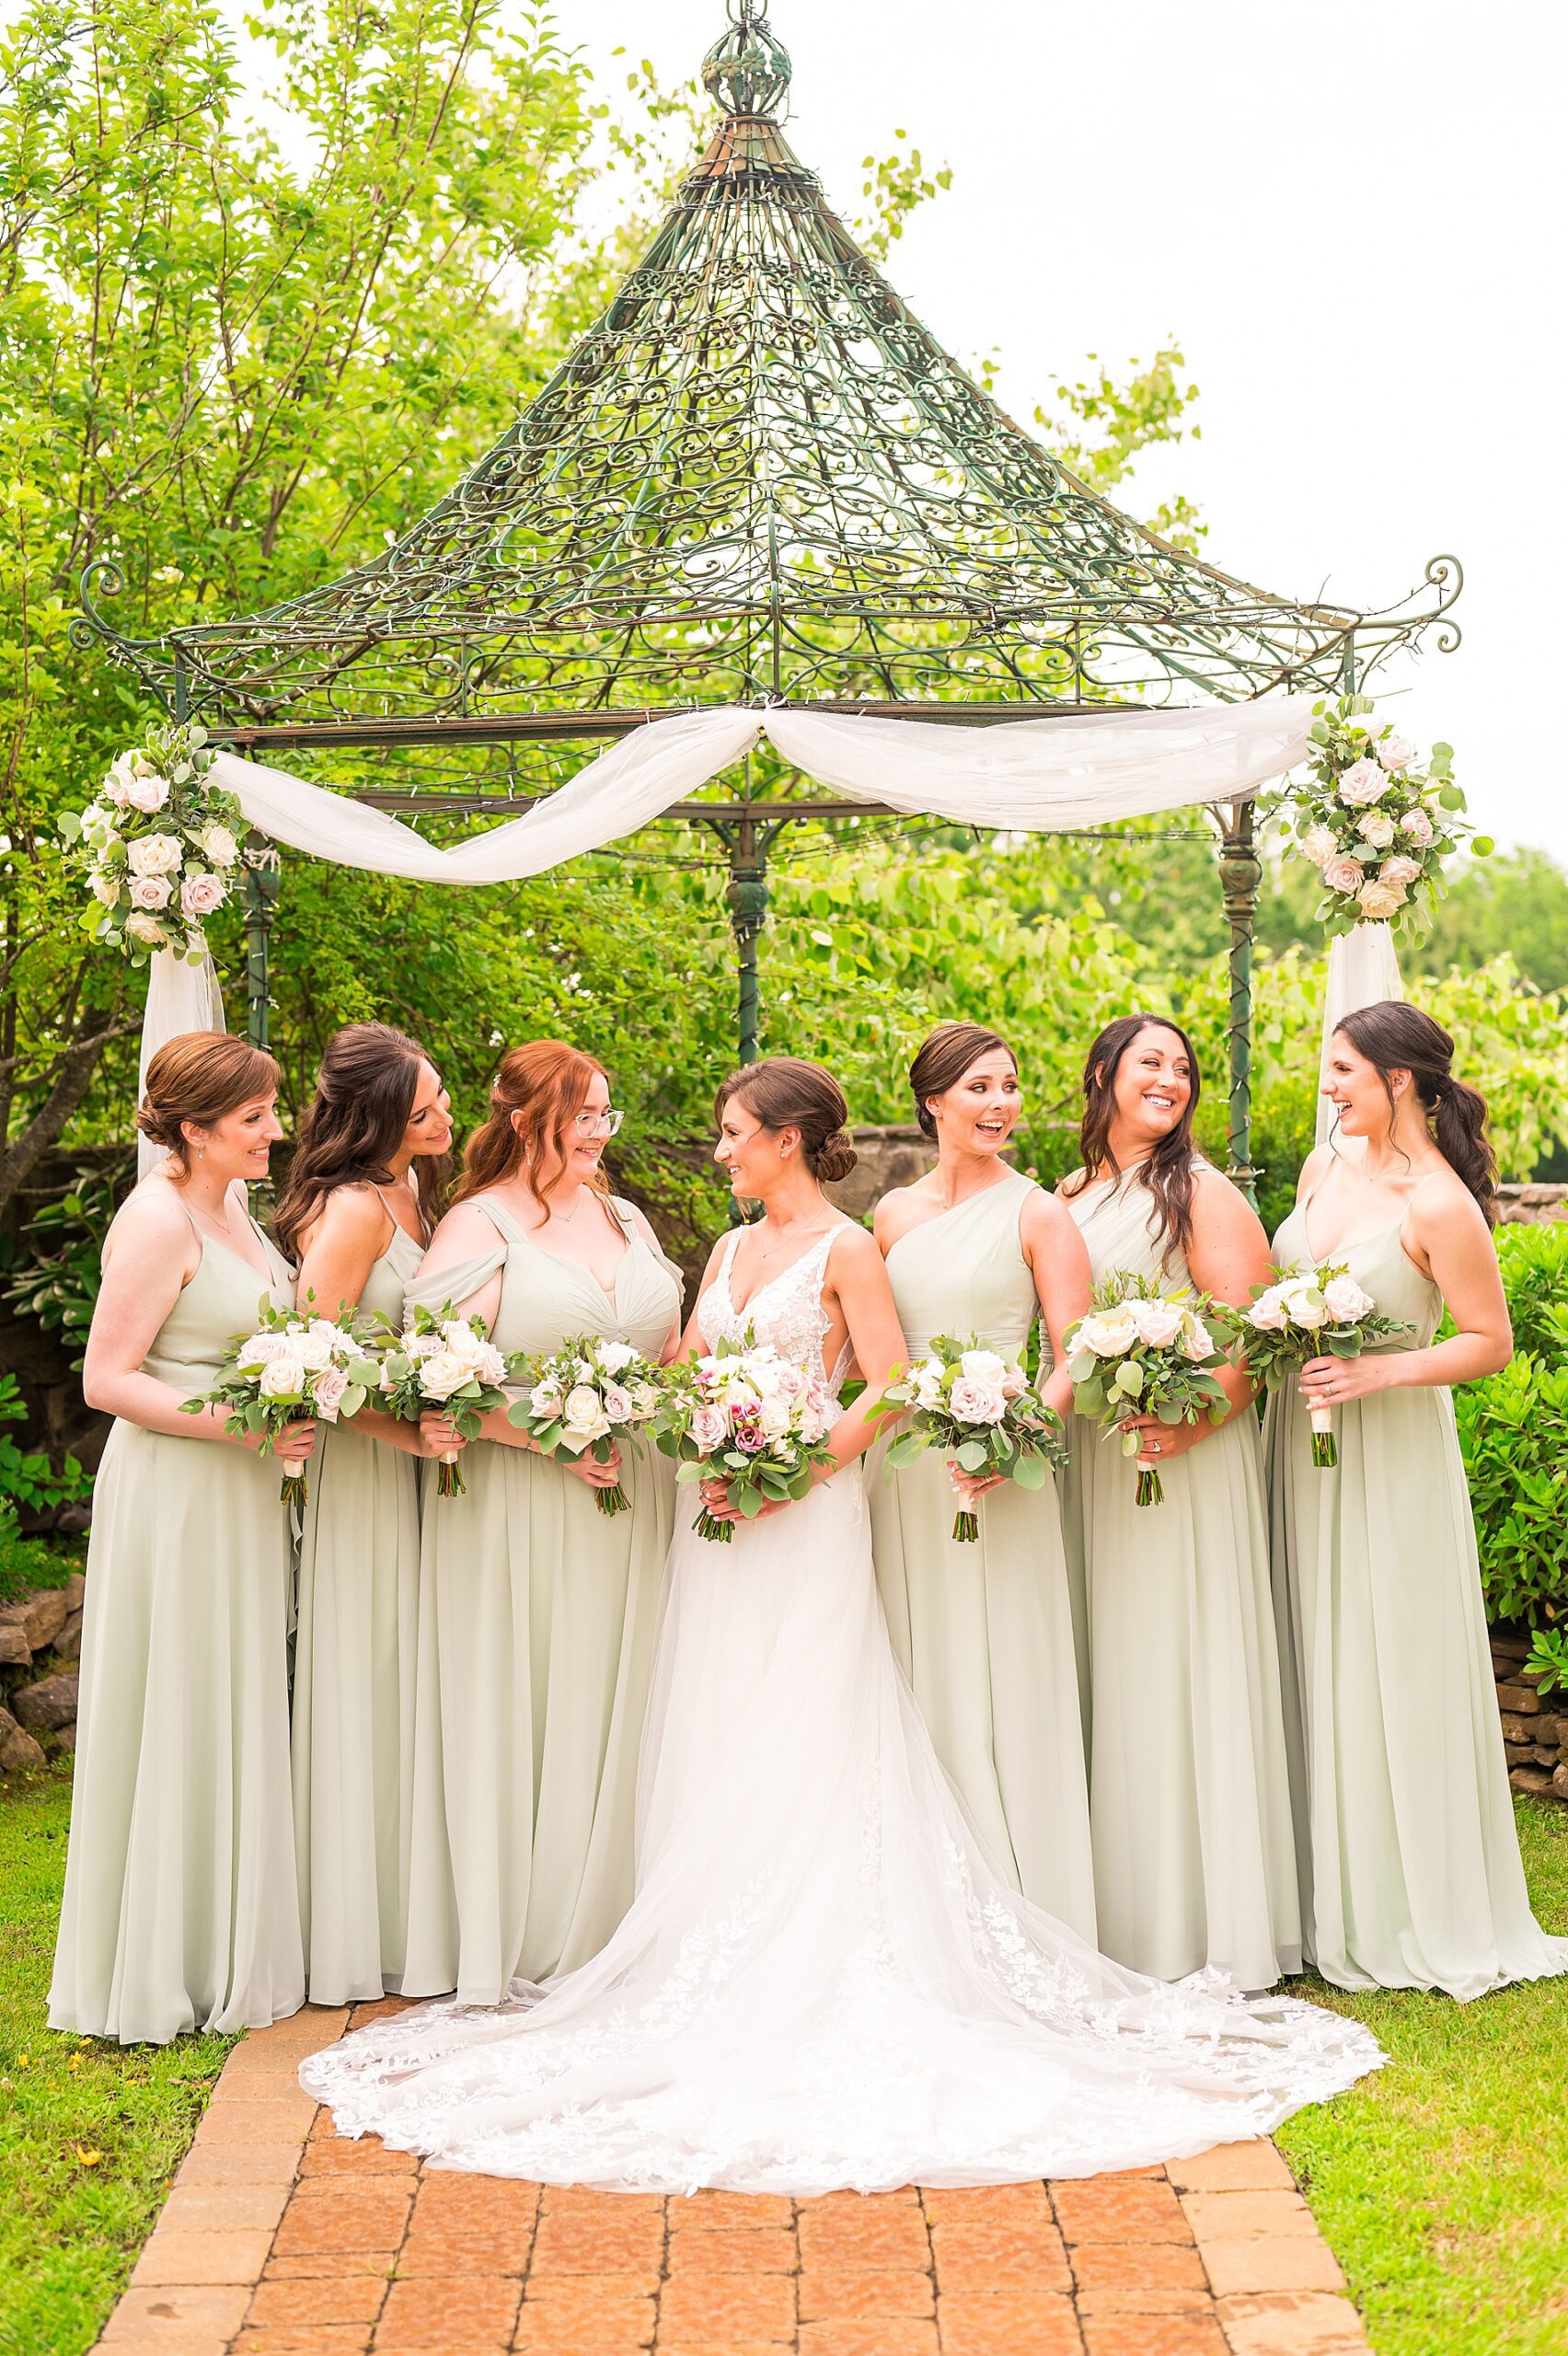 bride with bridesmaids in sage green dresses